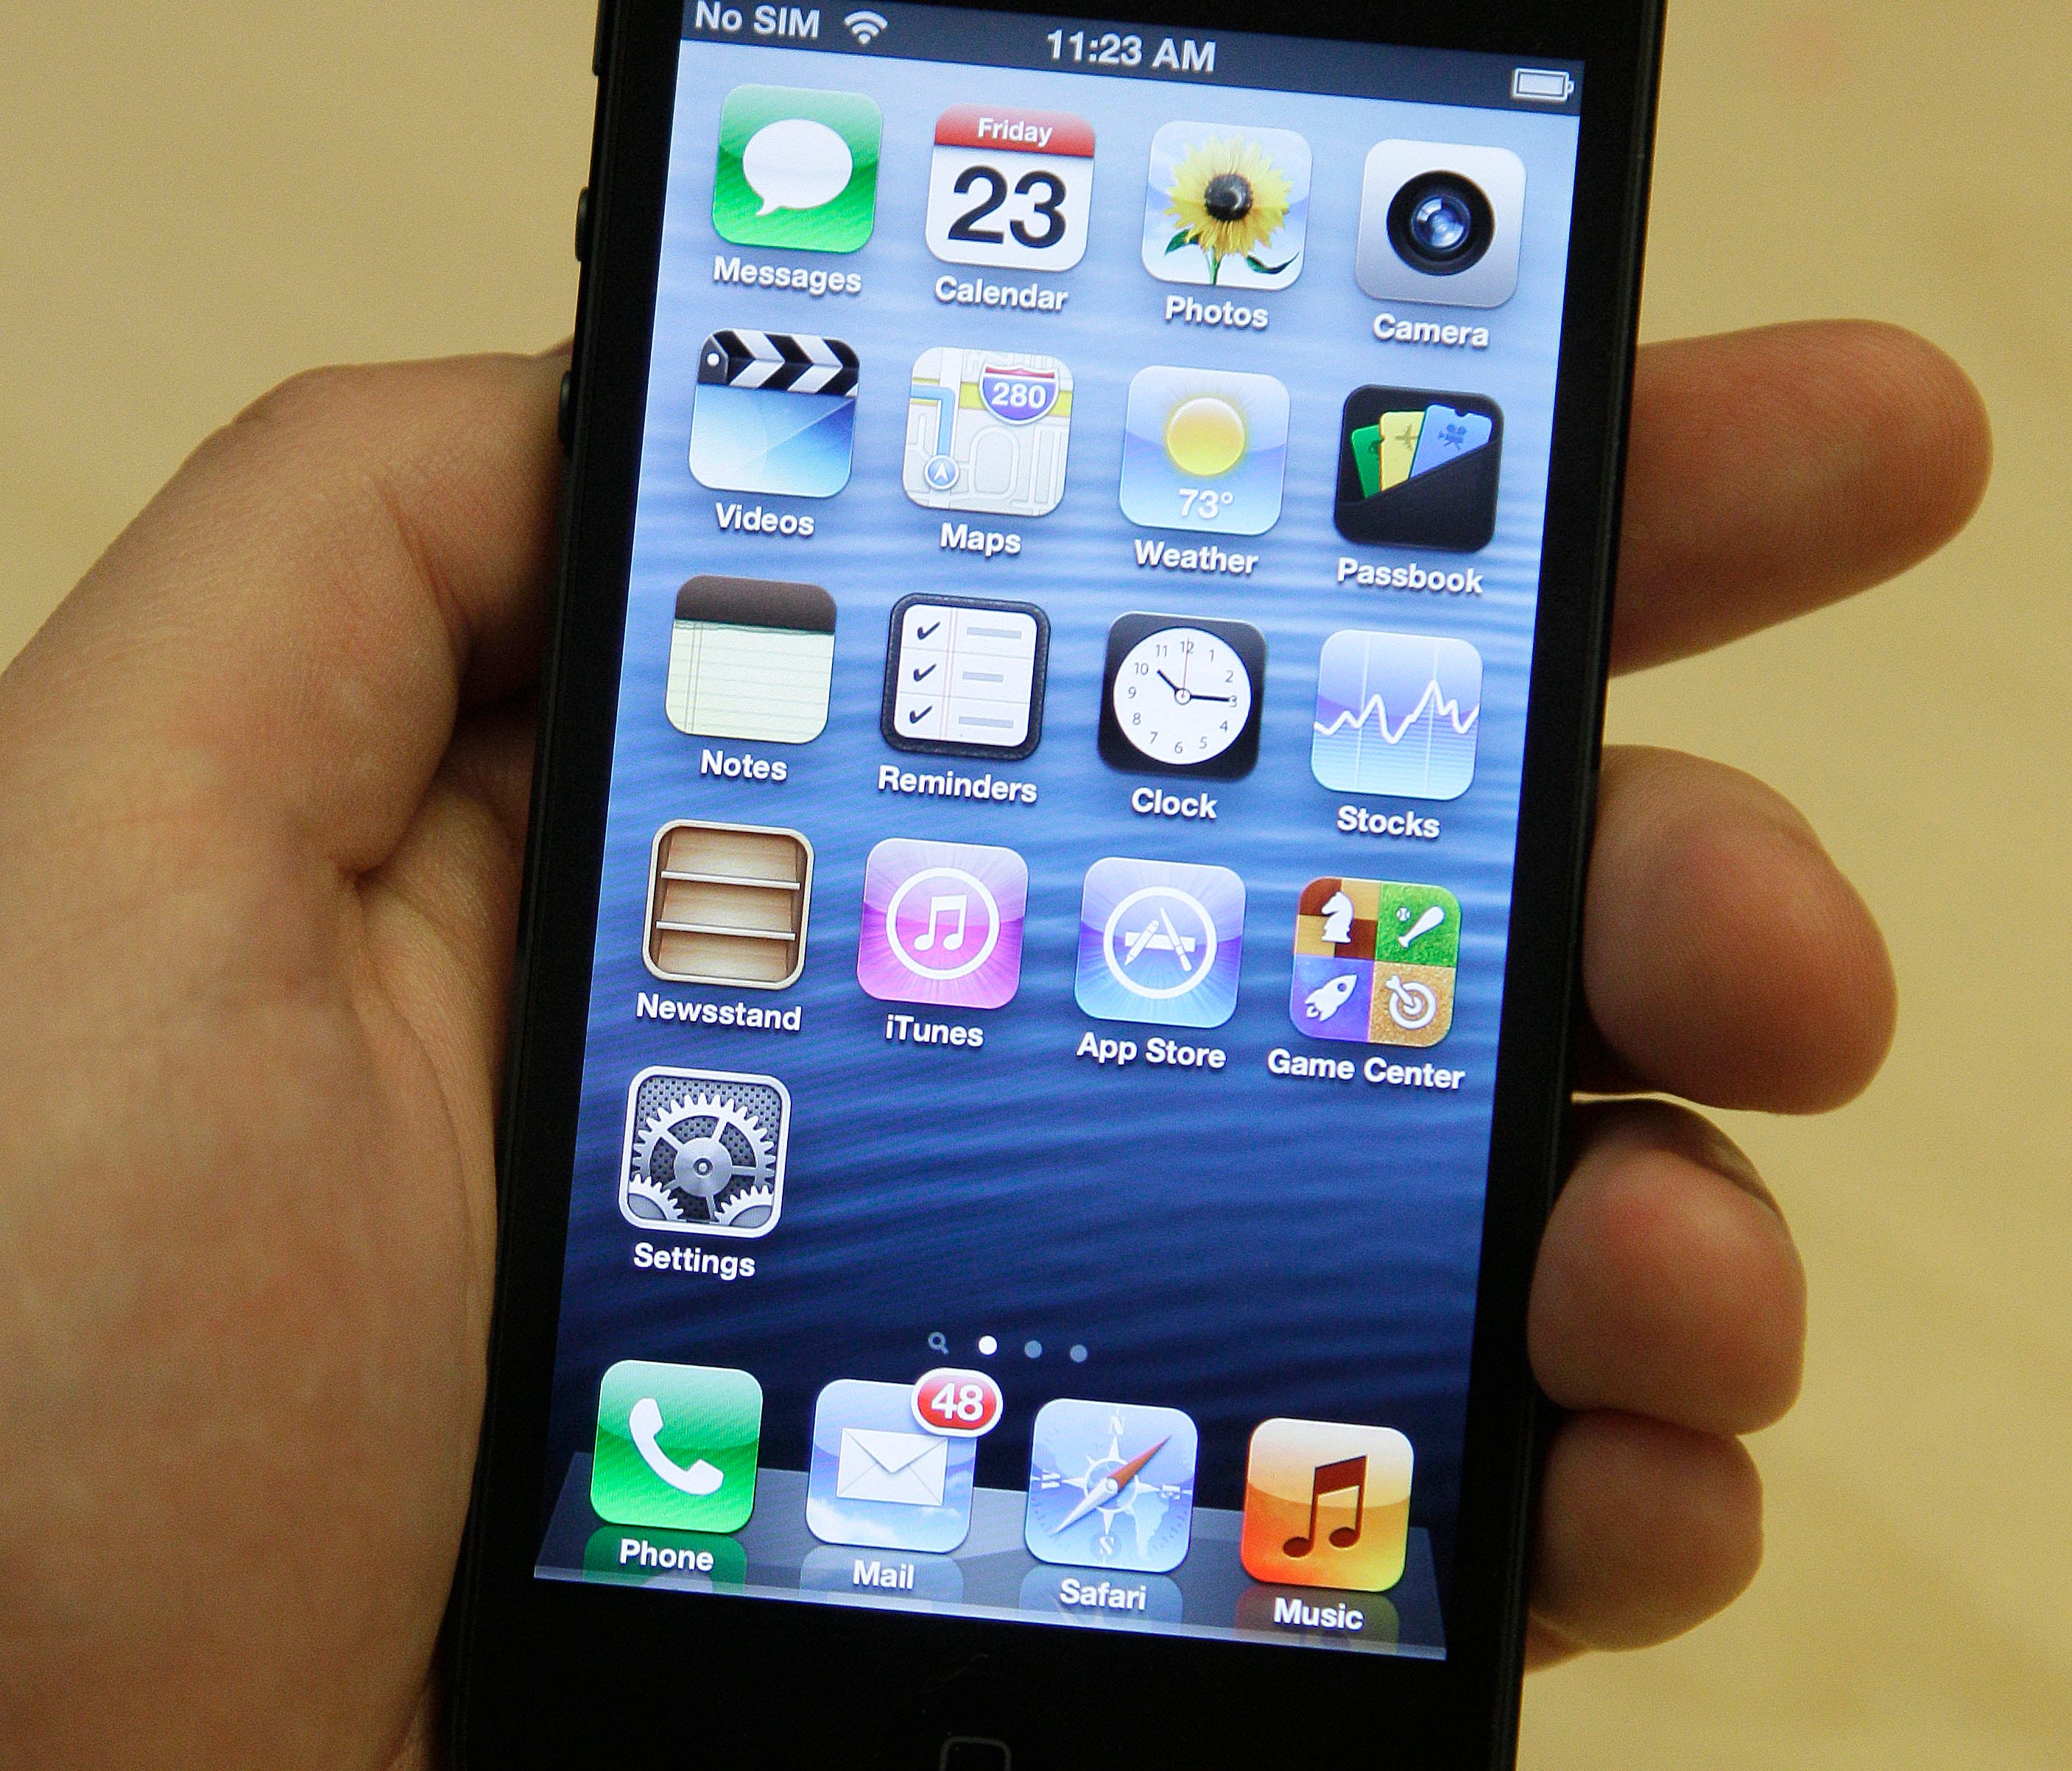 The iPhone 5 was released on Sept. 21, 2012.